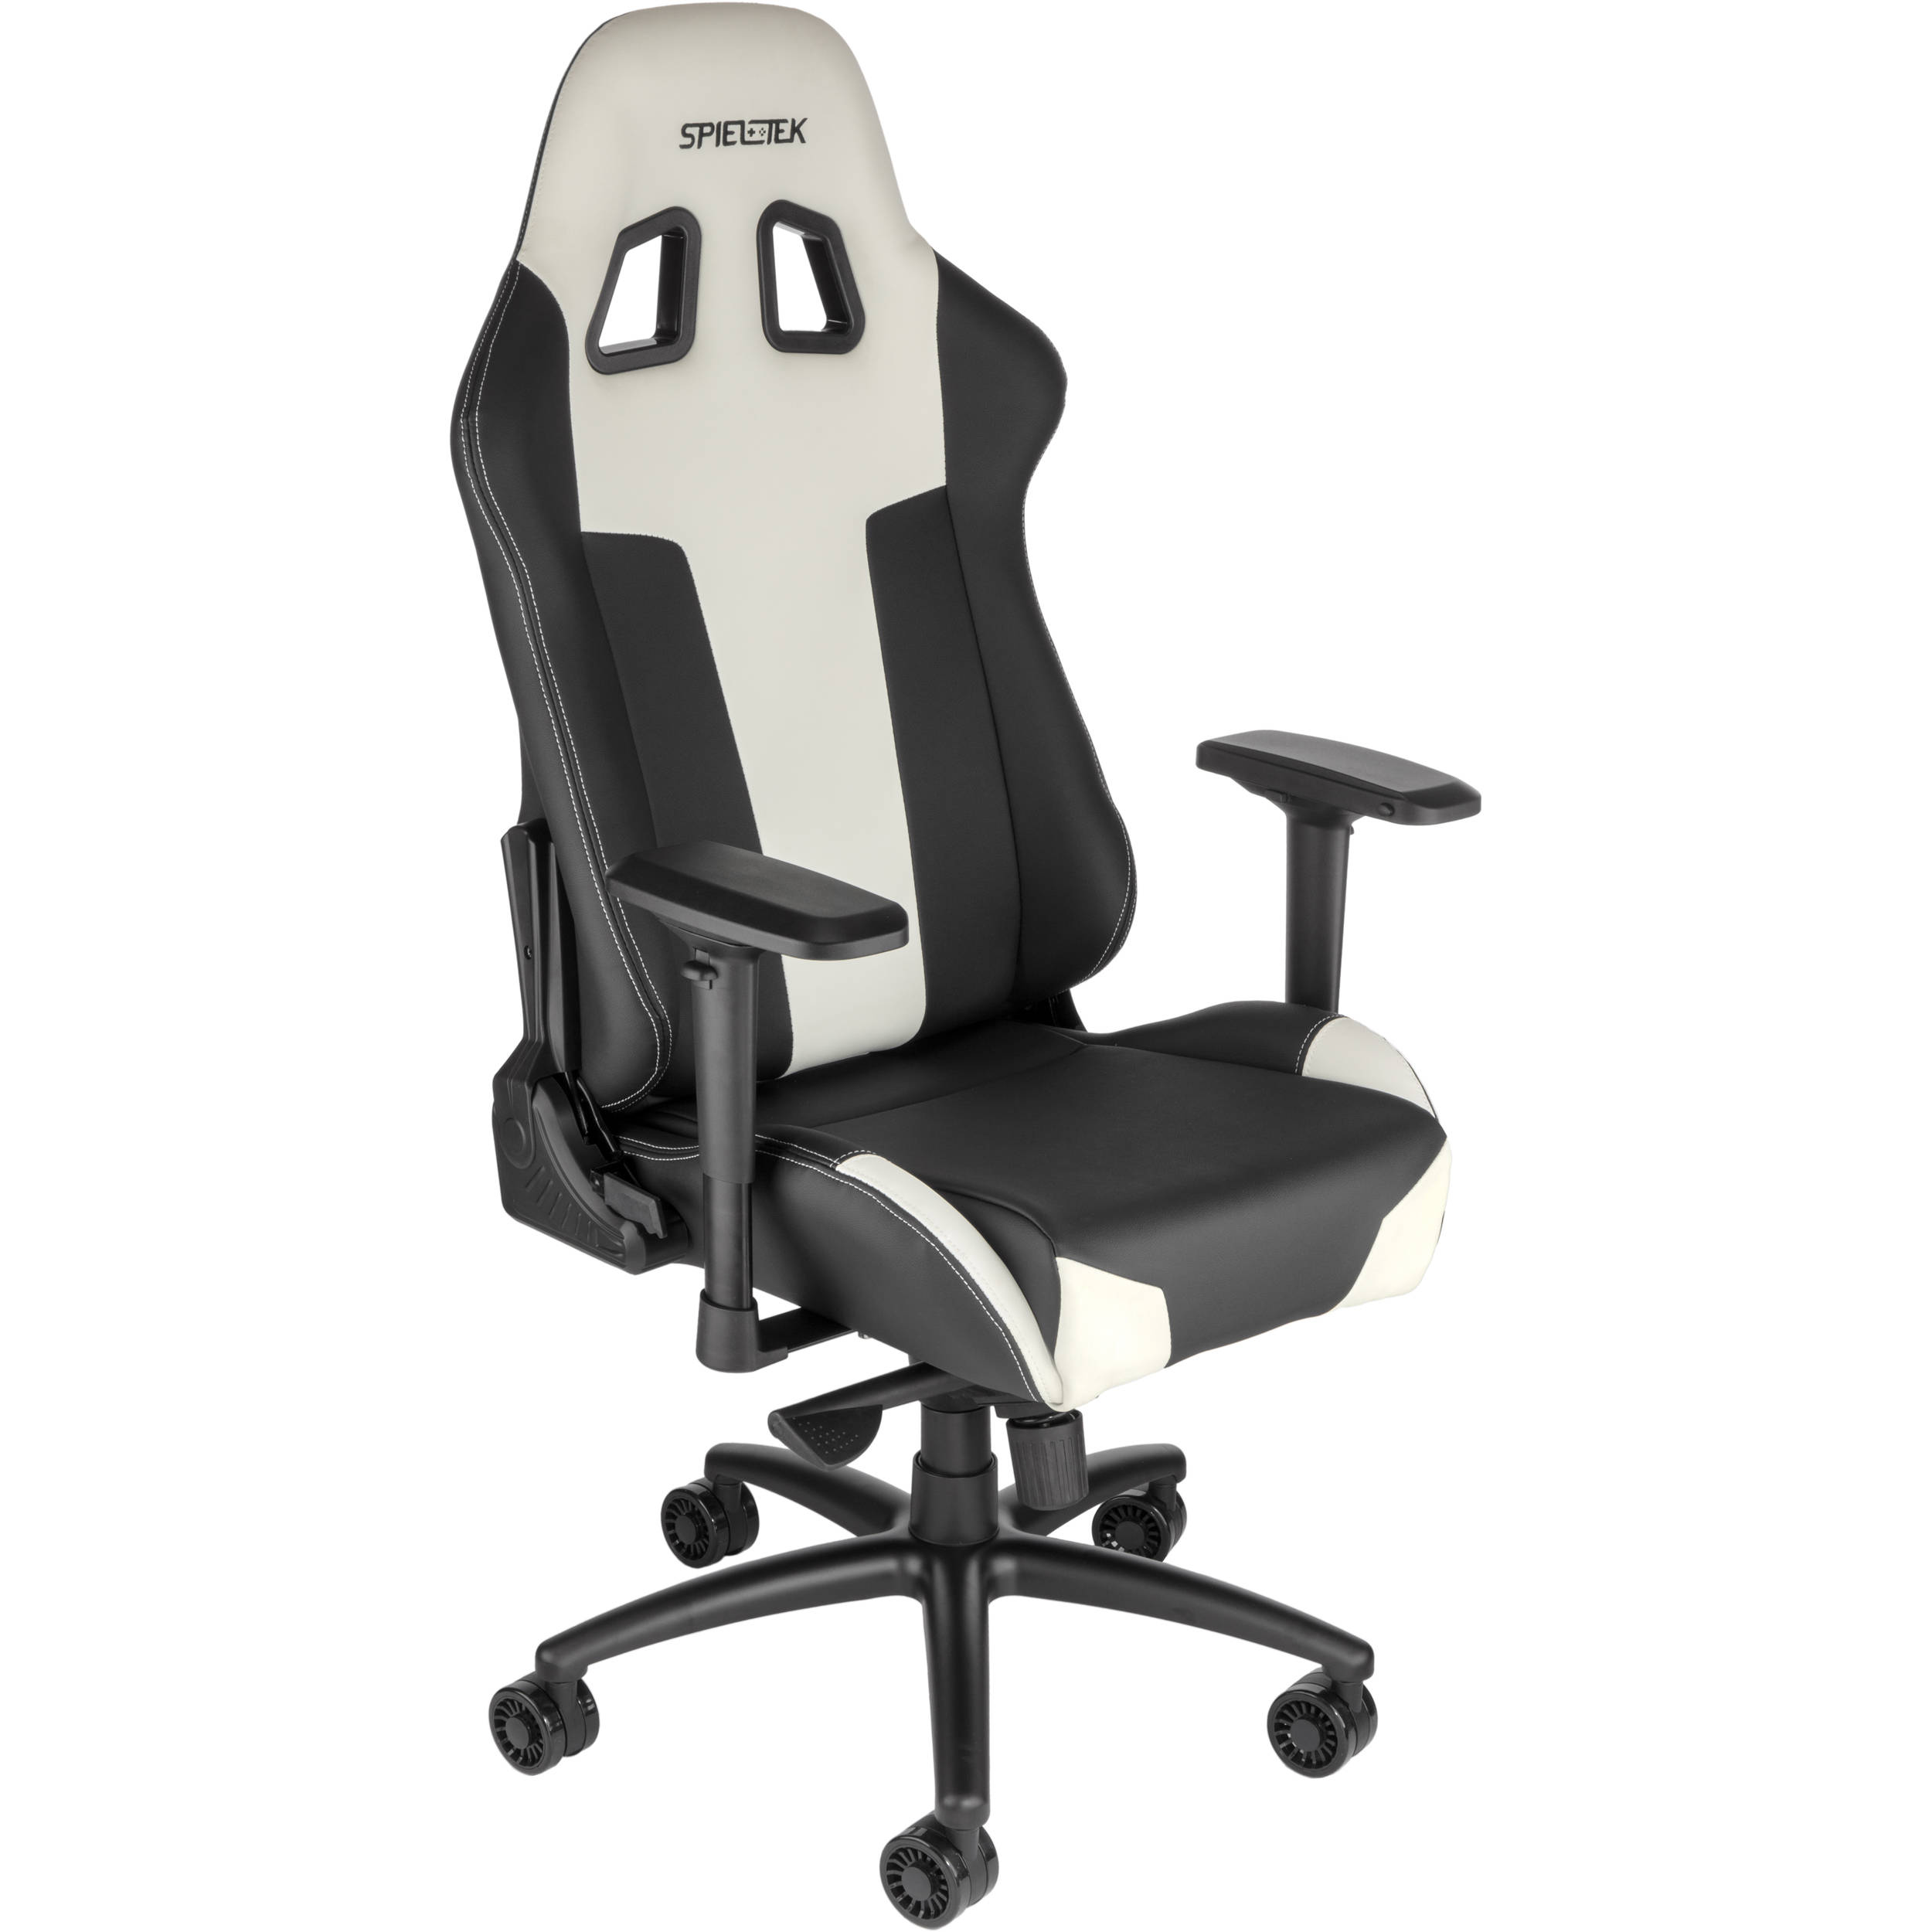 Chair For Long Gaming Sessions Gaming Chair